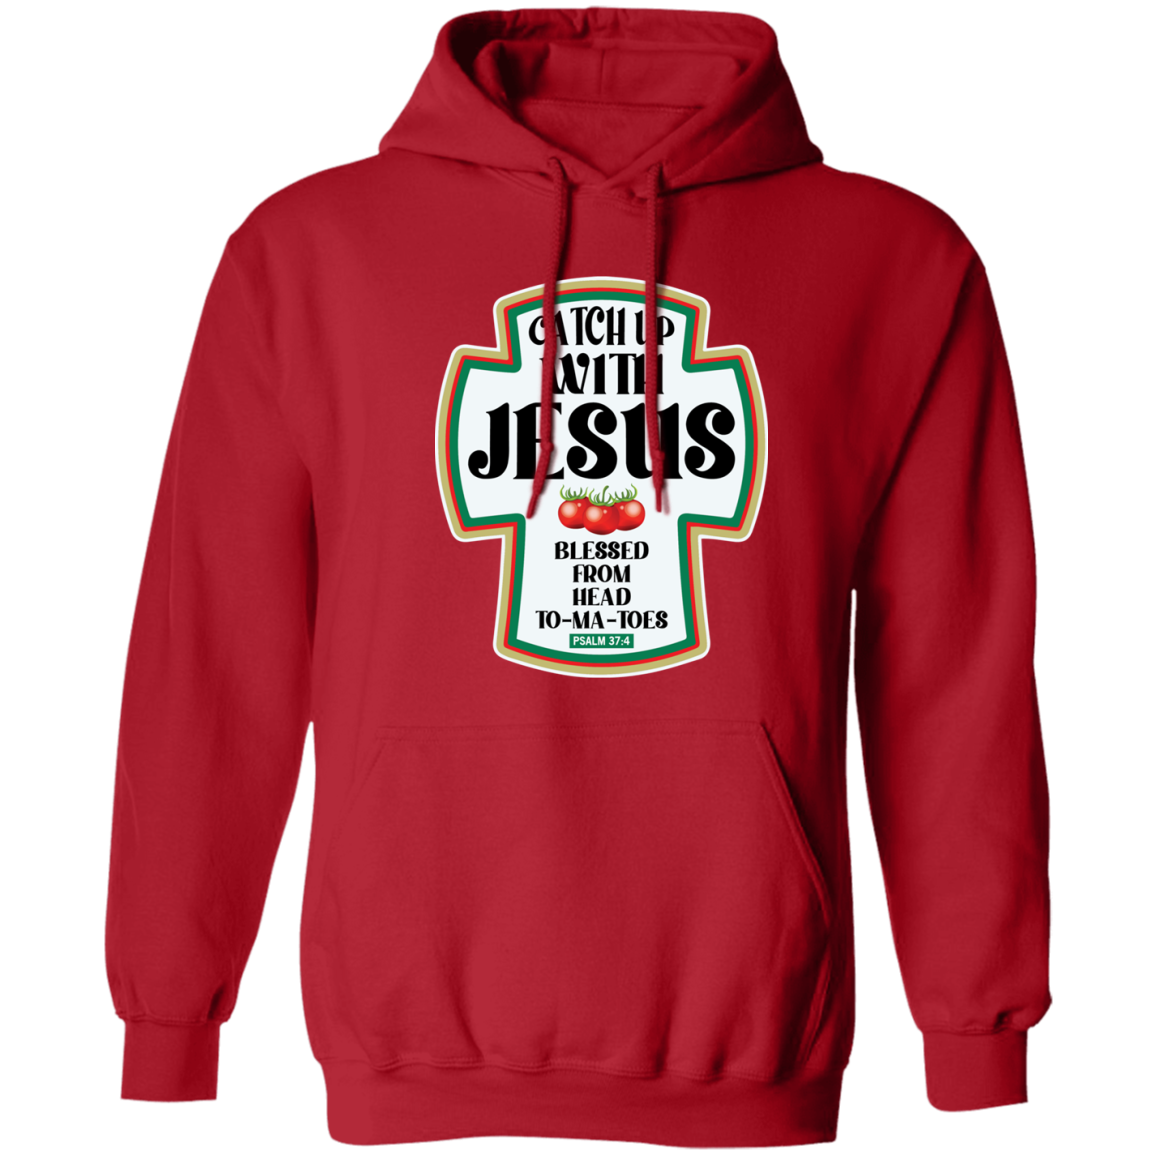 CATCH UP WITH JESUS  Hoodie